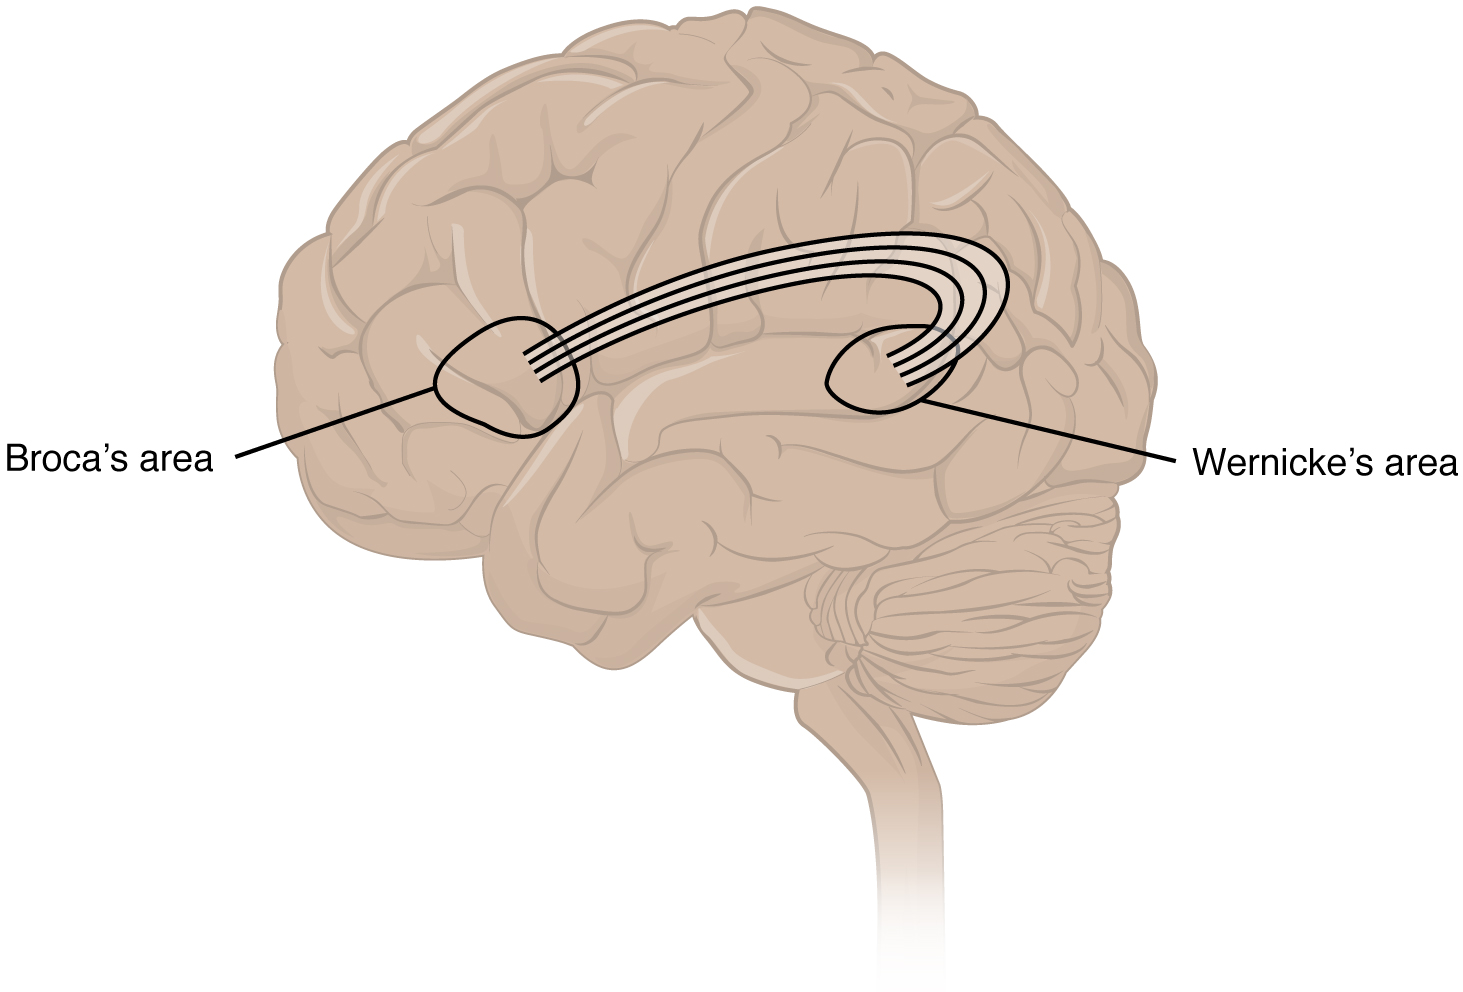 In left hemisphere, Wernicke's area (posterior) is connected to Broca's area (anterior) by tracts.